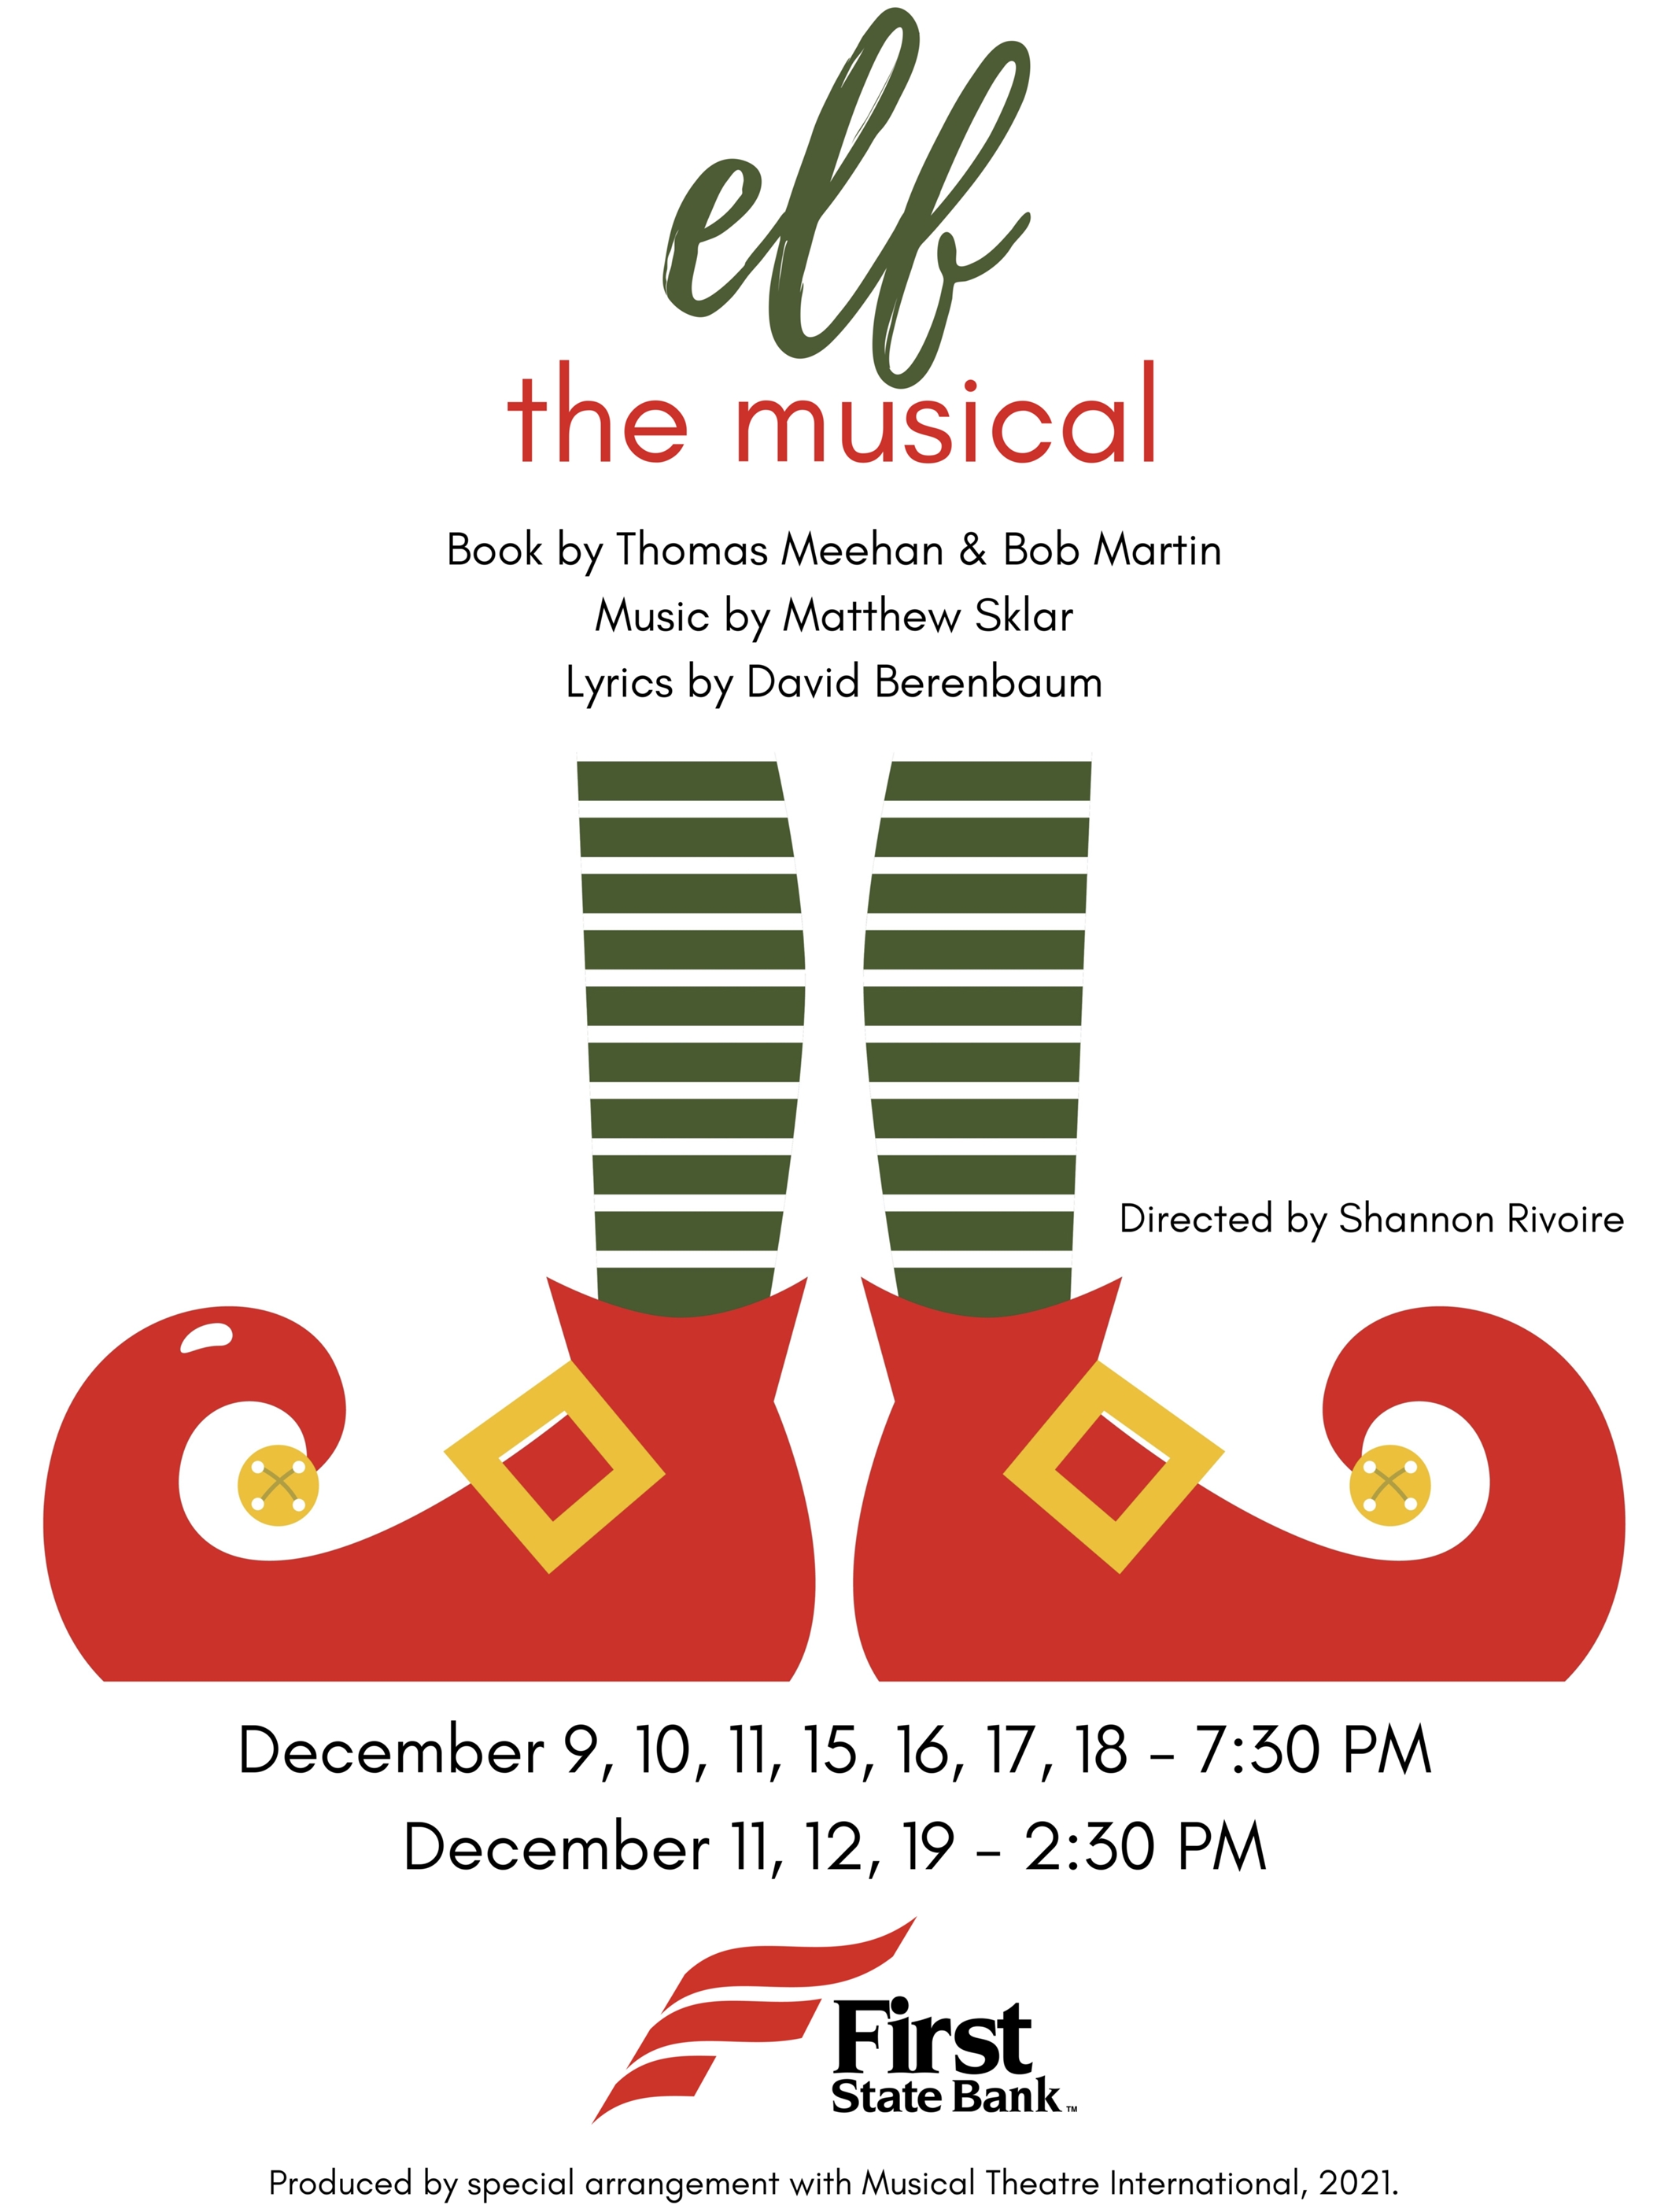 elf-the-musical-at-butterfield-stage-players-performances-december-9